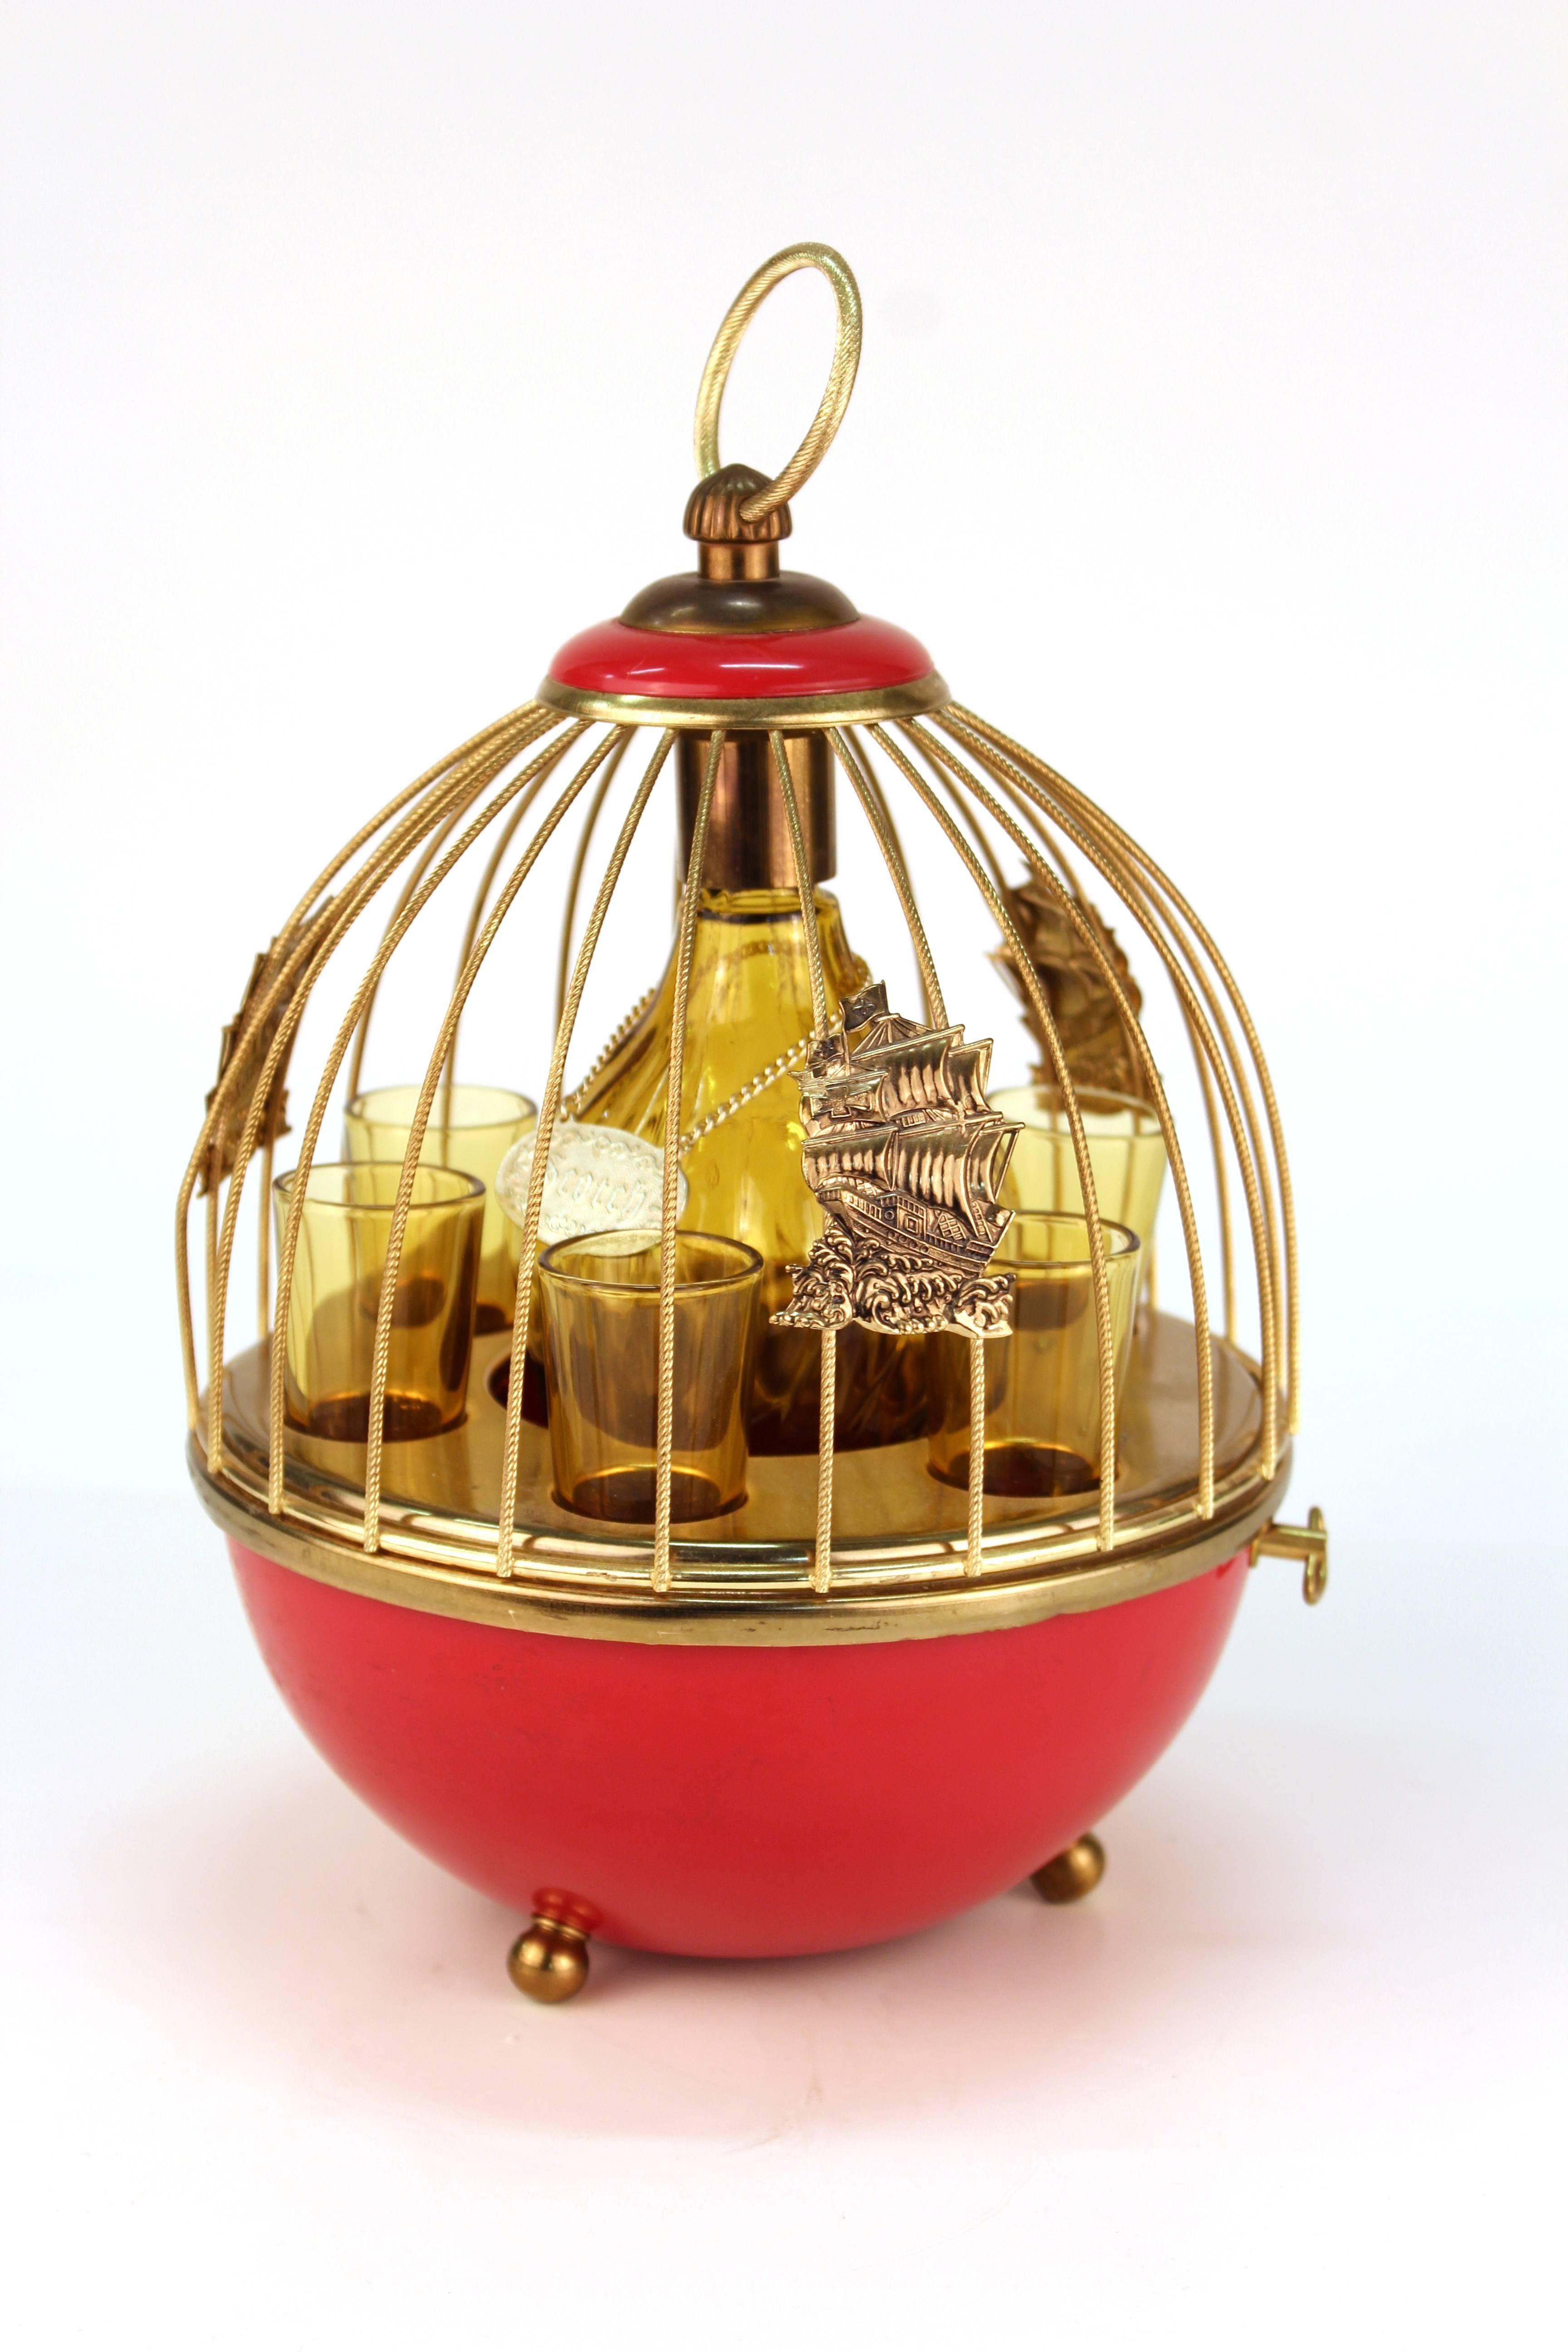 A Mid-Century Modern decanter set within a bird cage setting, consisting of a decanter and six glasses. The decanter has a 'scotch' tag. The bird cage has decorative galleon ornaments. The piece plays 'The Days of Wine and Roses'. In good vintage